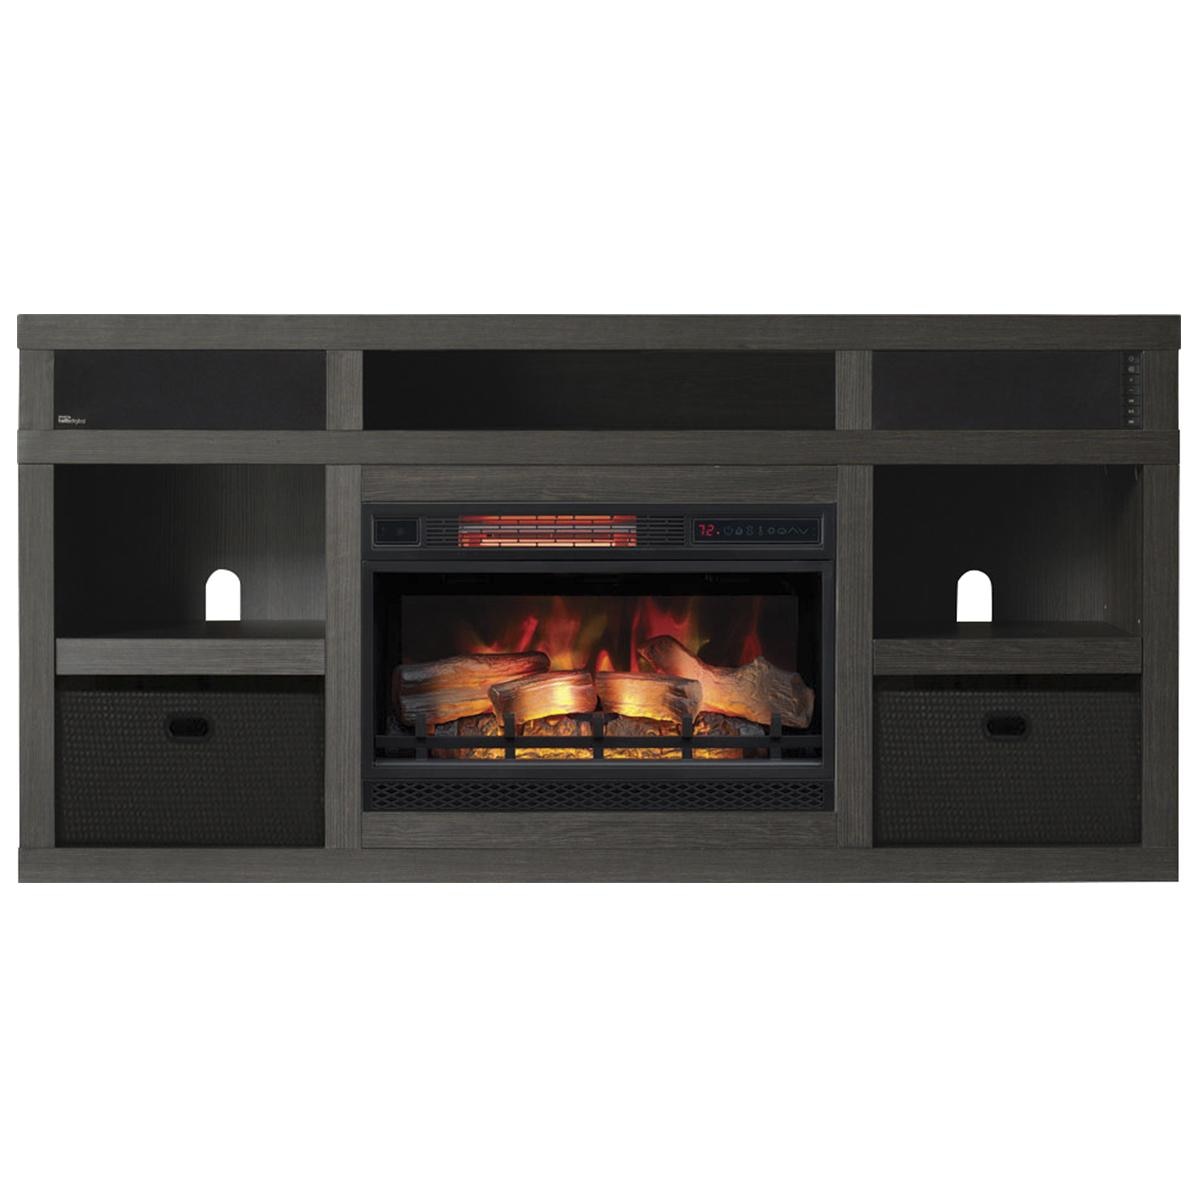 Fireplace thermostat Awesome Fabio Flames Greatlin 3 Piece Fireplace Entertainment Wall